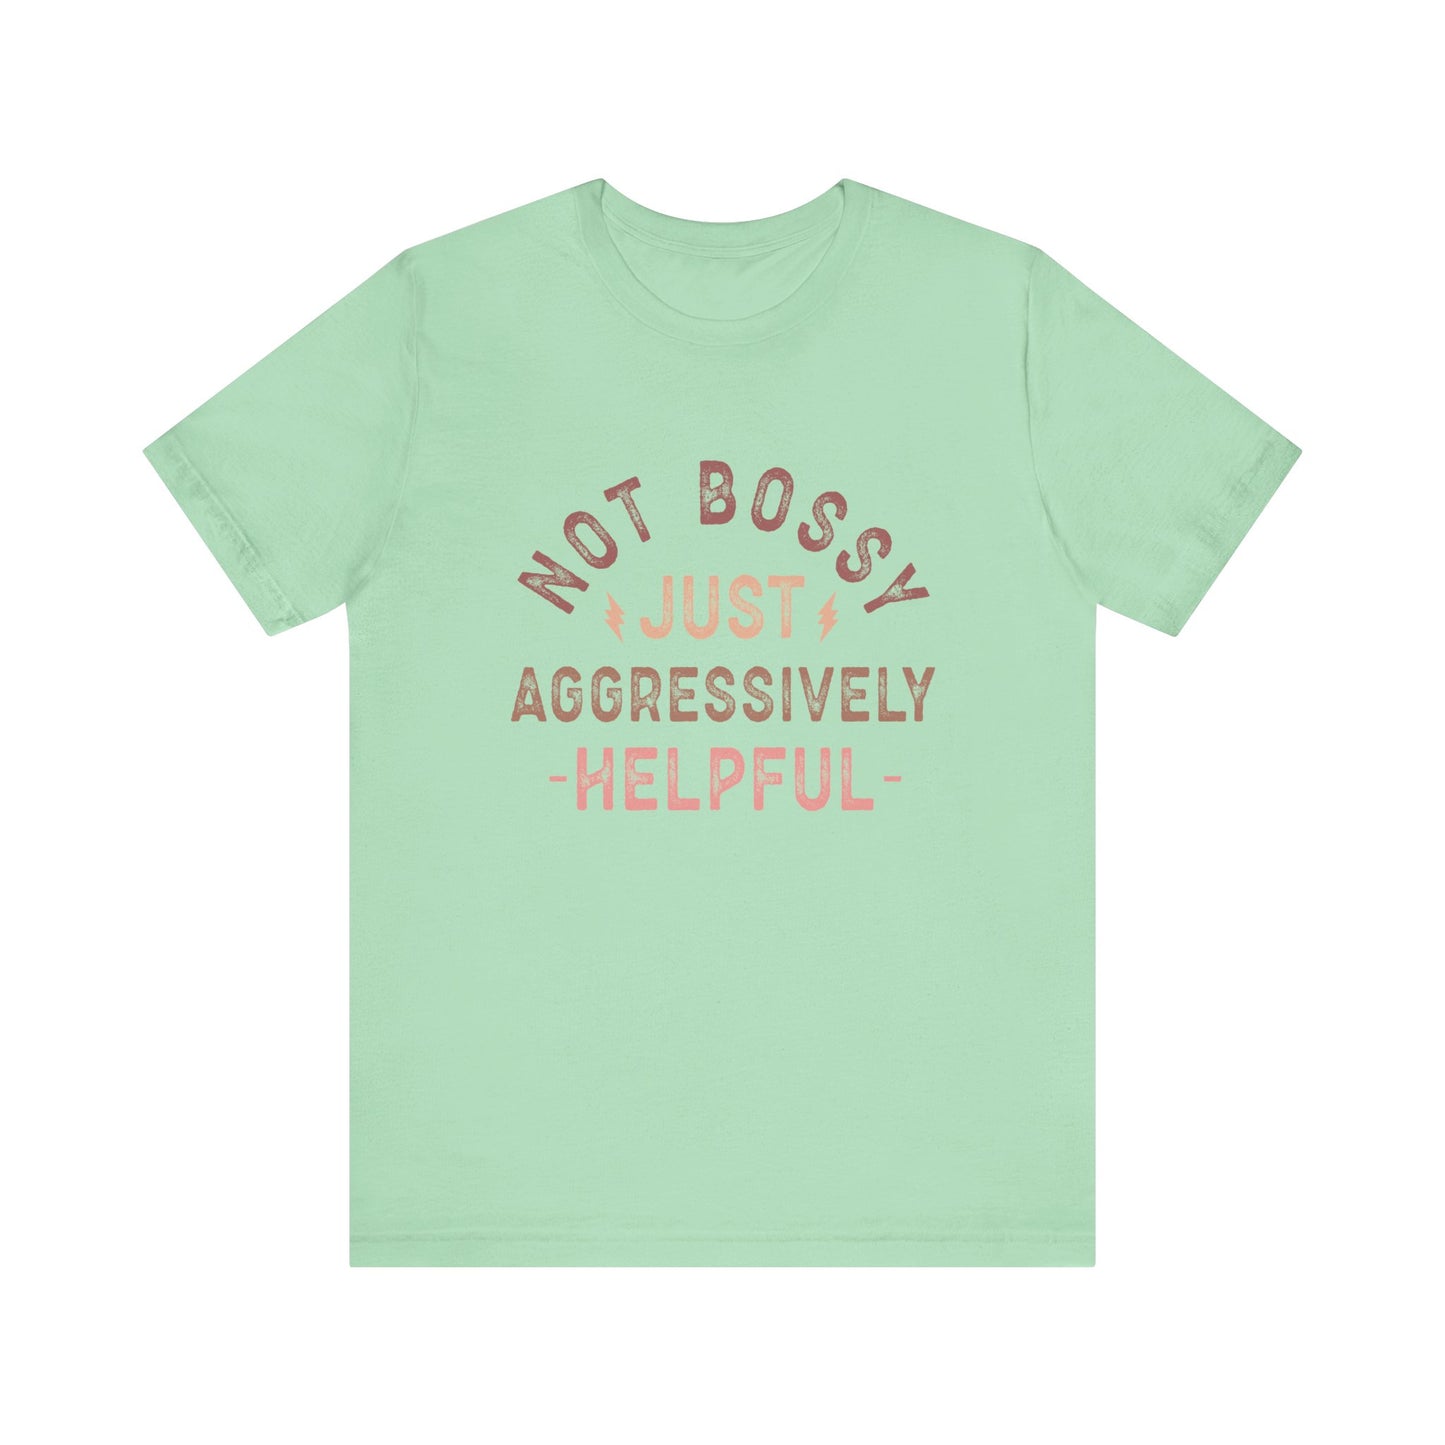 Not Bossy Just Aggressively Helpful Funny Women's Short Sleeve Tee